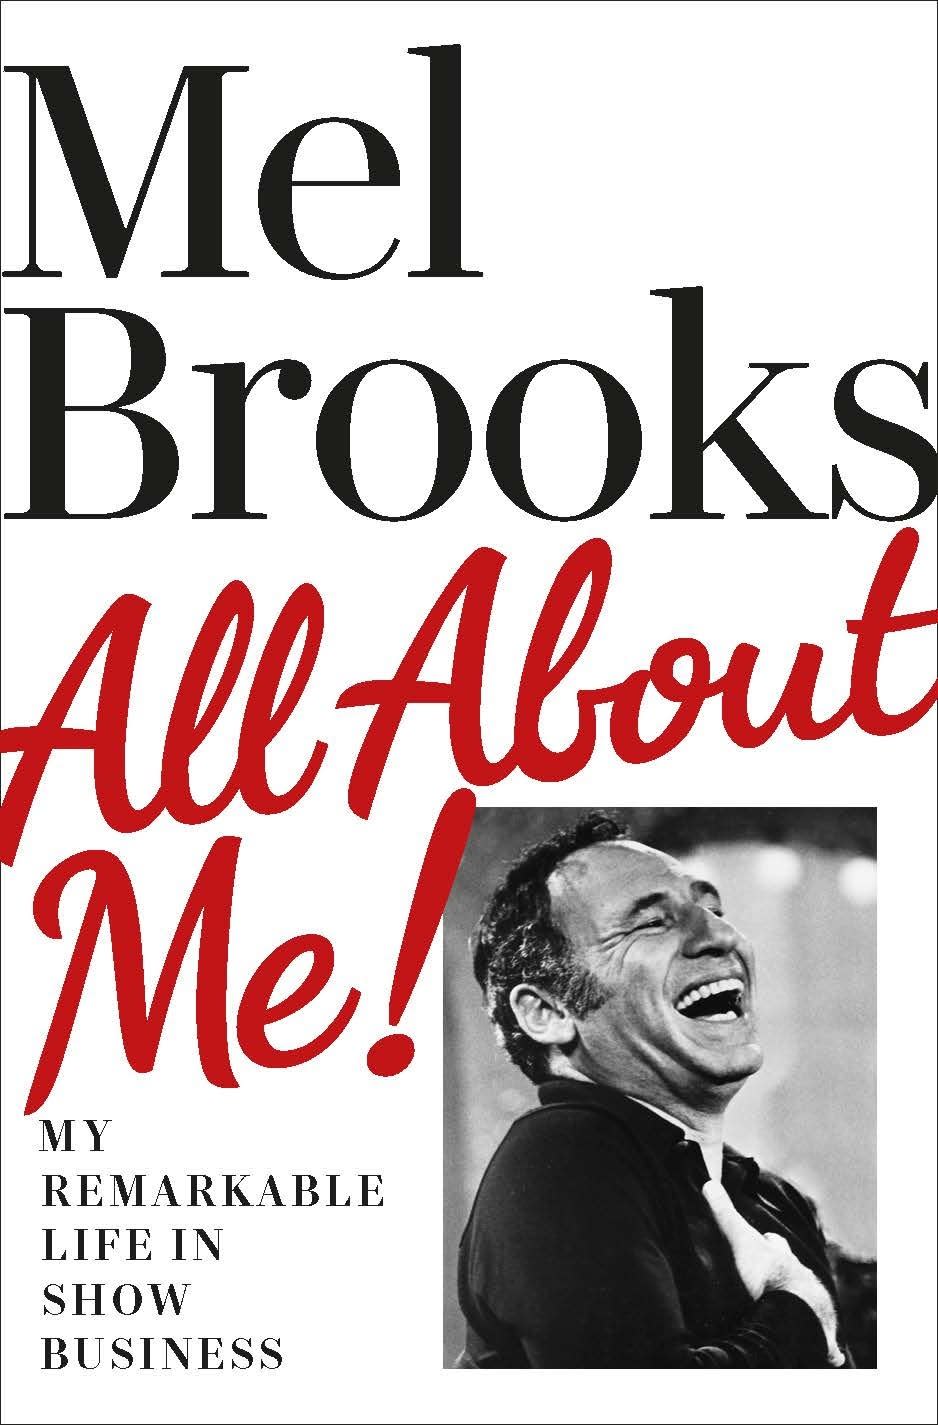 This cover image released by Ballantine shows "All About Me: My Remarkable Life in Show Business" by Mel Brooks. The book will be released on Nov. 30. (Ballantine via AP)